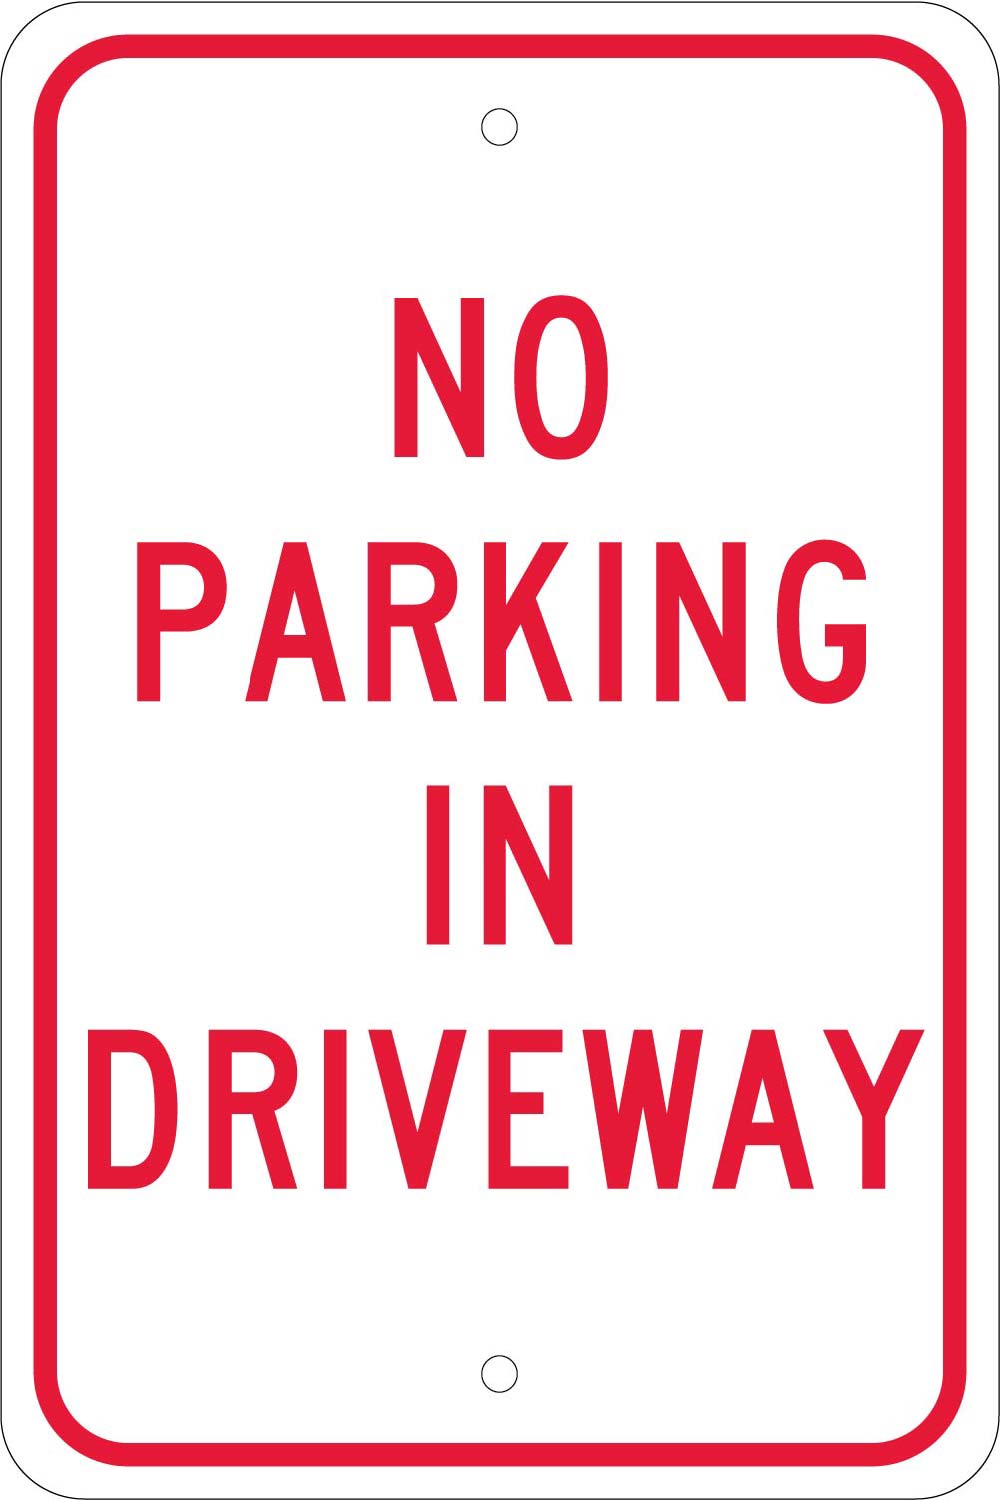 No Parking In Driveway Sign-eSafety Supplies, Inc